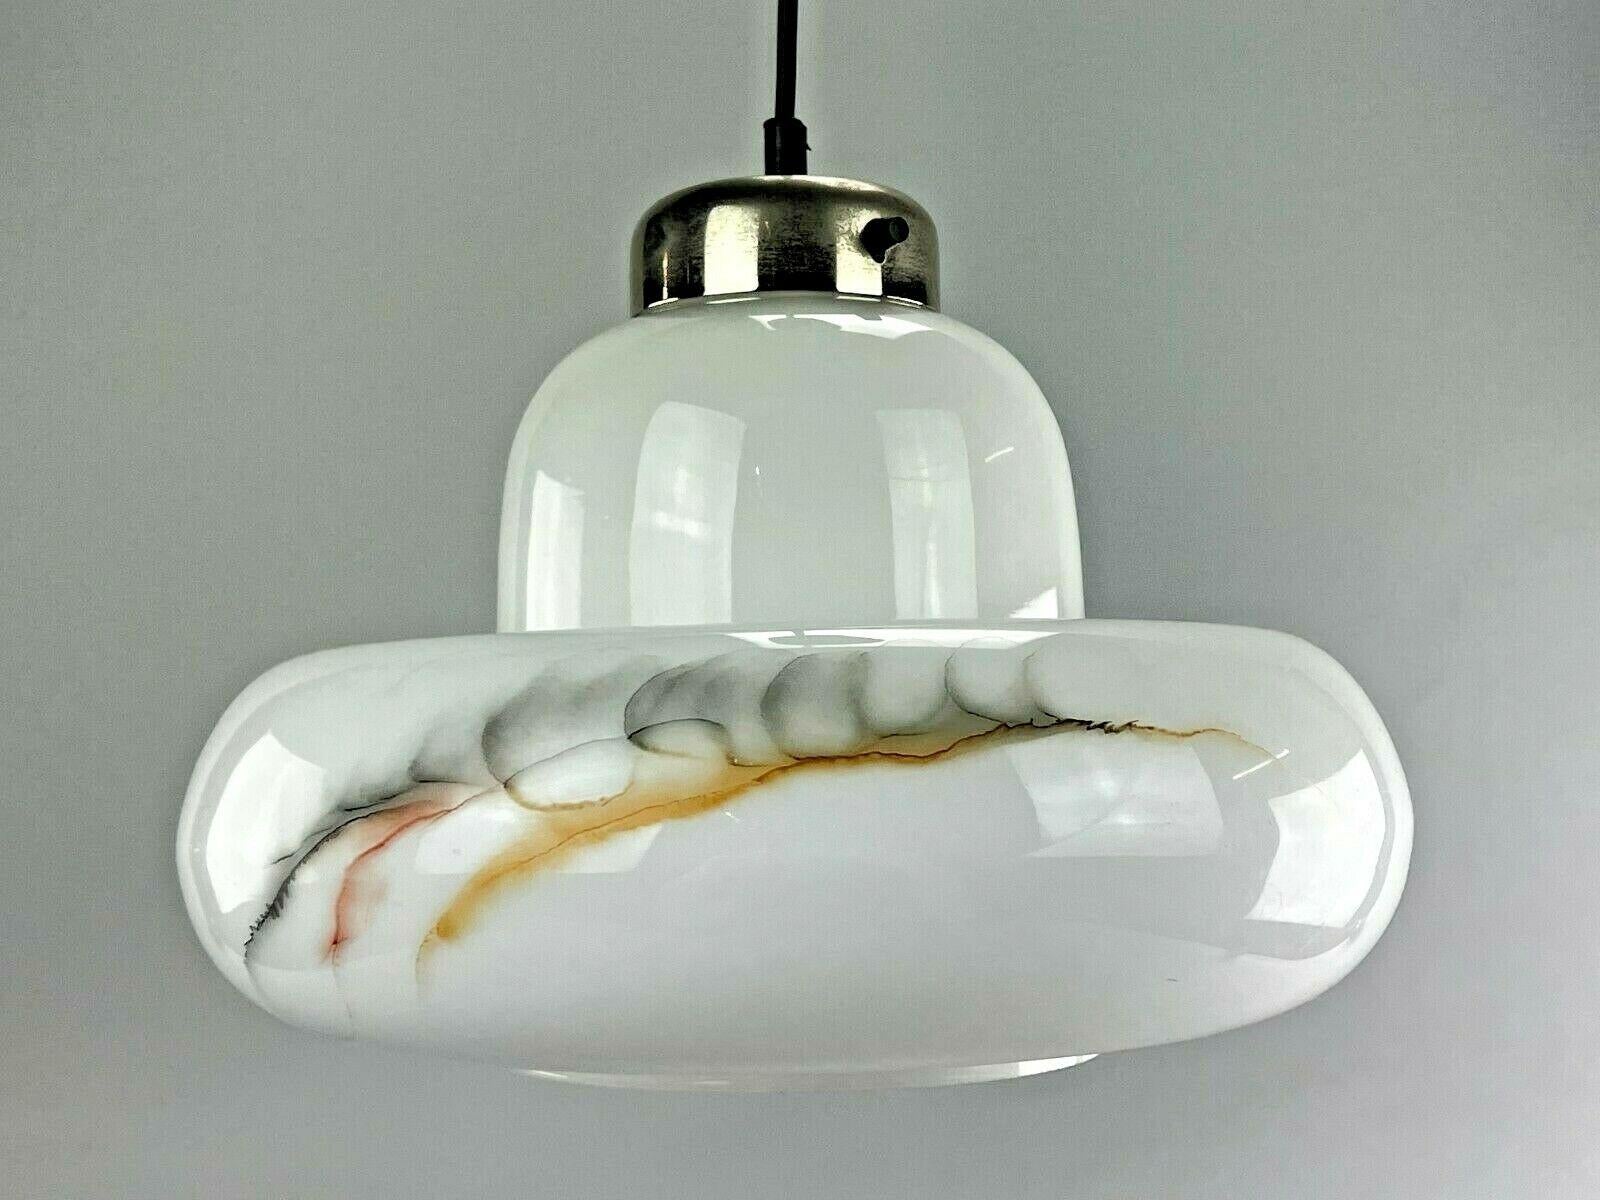 60s 70s lamp light hanging lamp glass ceiling lamp Space Age Design 60s

Object: ceiling lamp

Manufacturer:

Condition: good

Age: around 1960-1970

Dimensions:

Diameter = 35cm
Height = 25cm

Other notes:

The pictures serve as